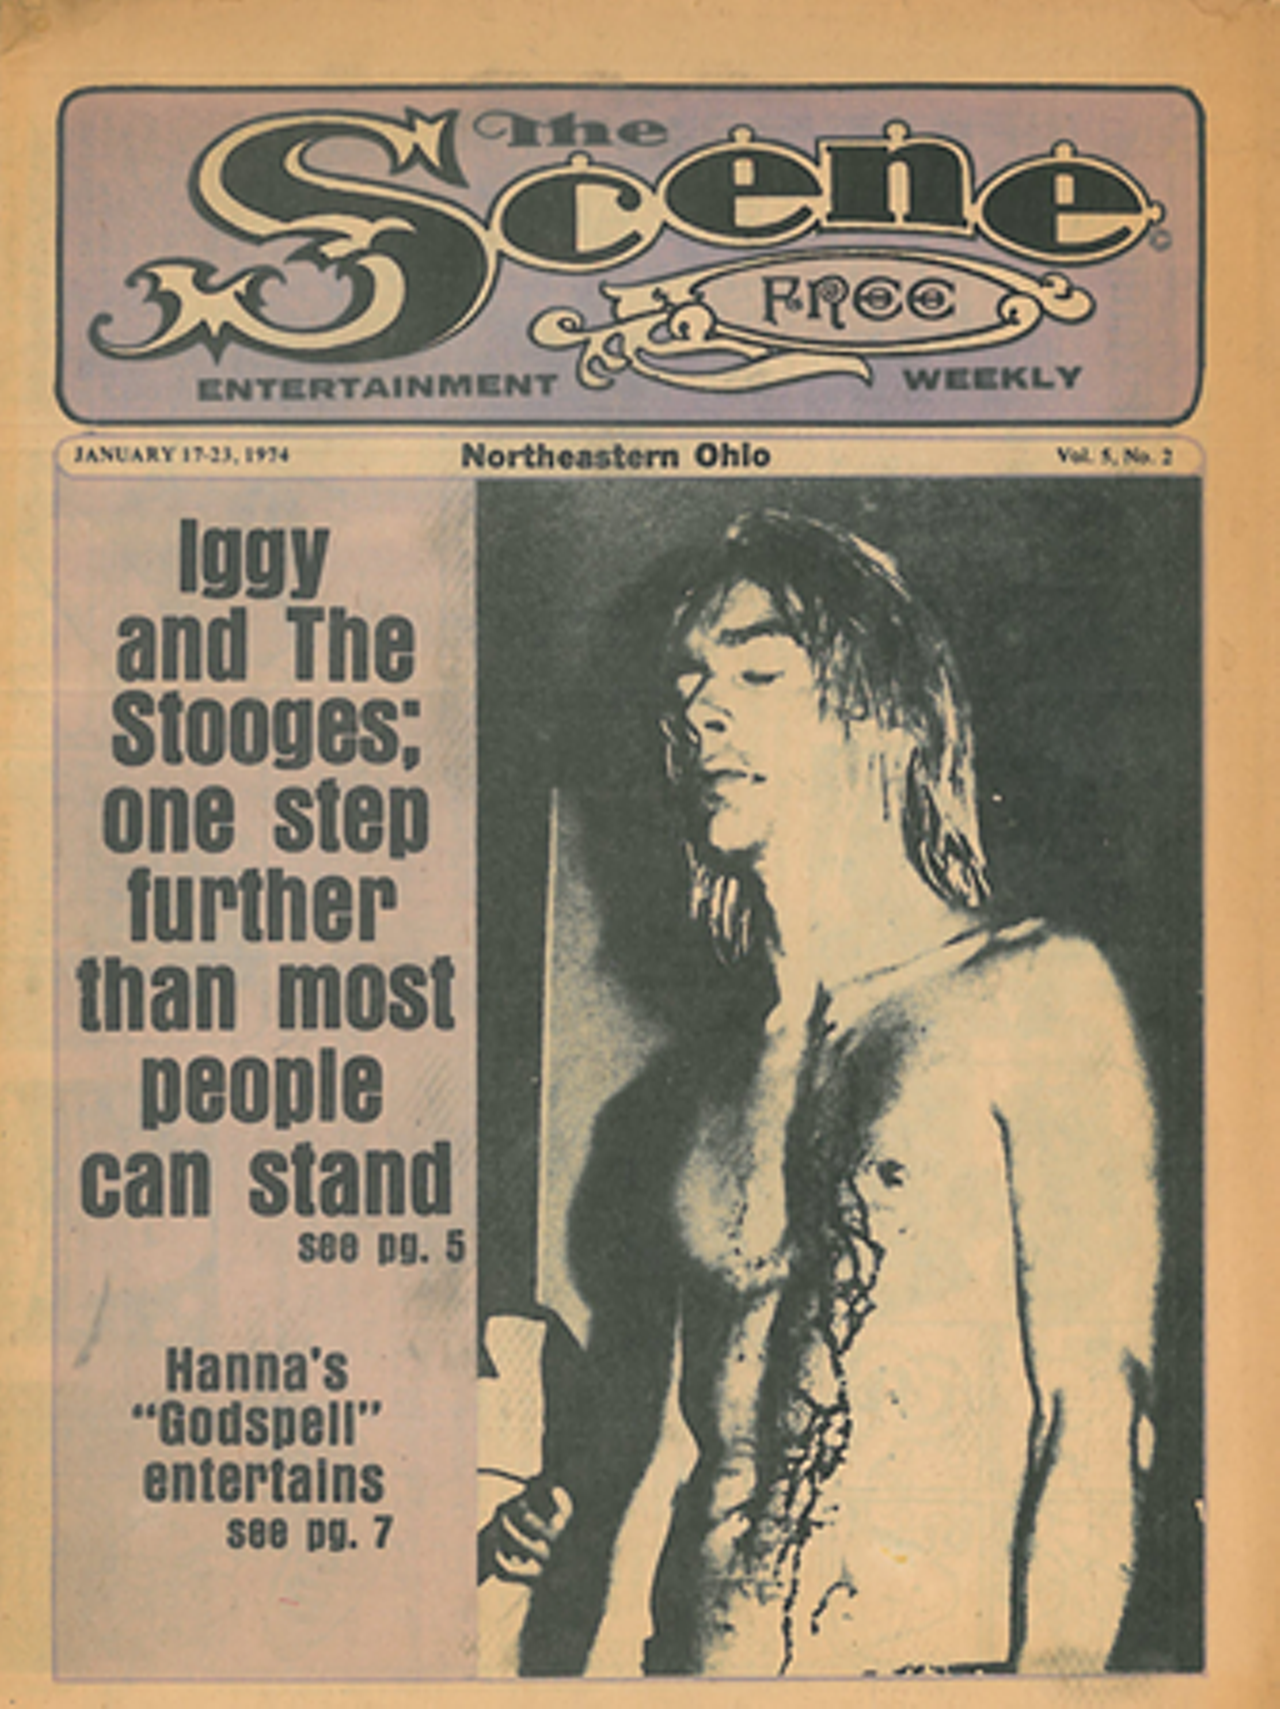 Iggy and The Stooges; one step further than most people can stand, 1974